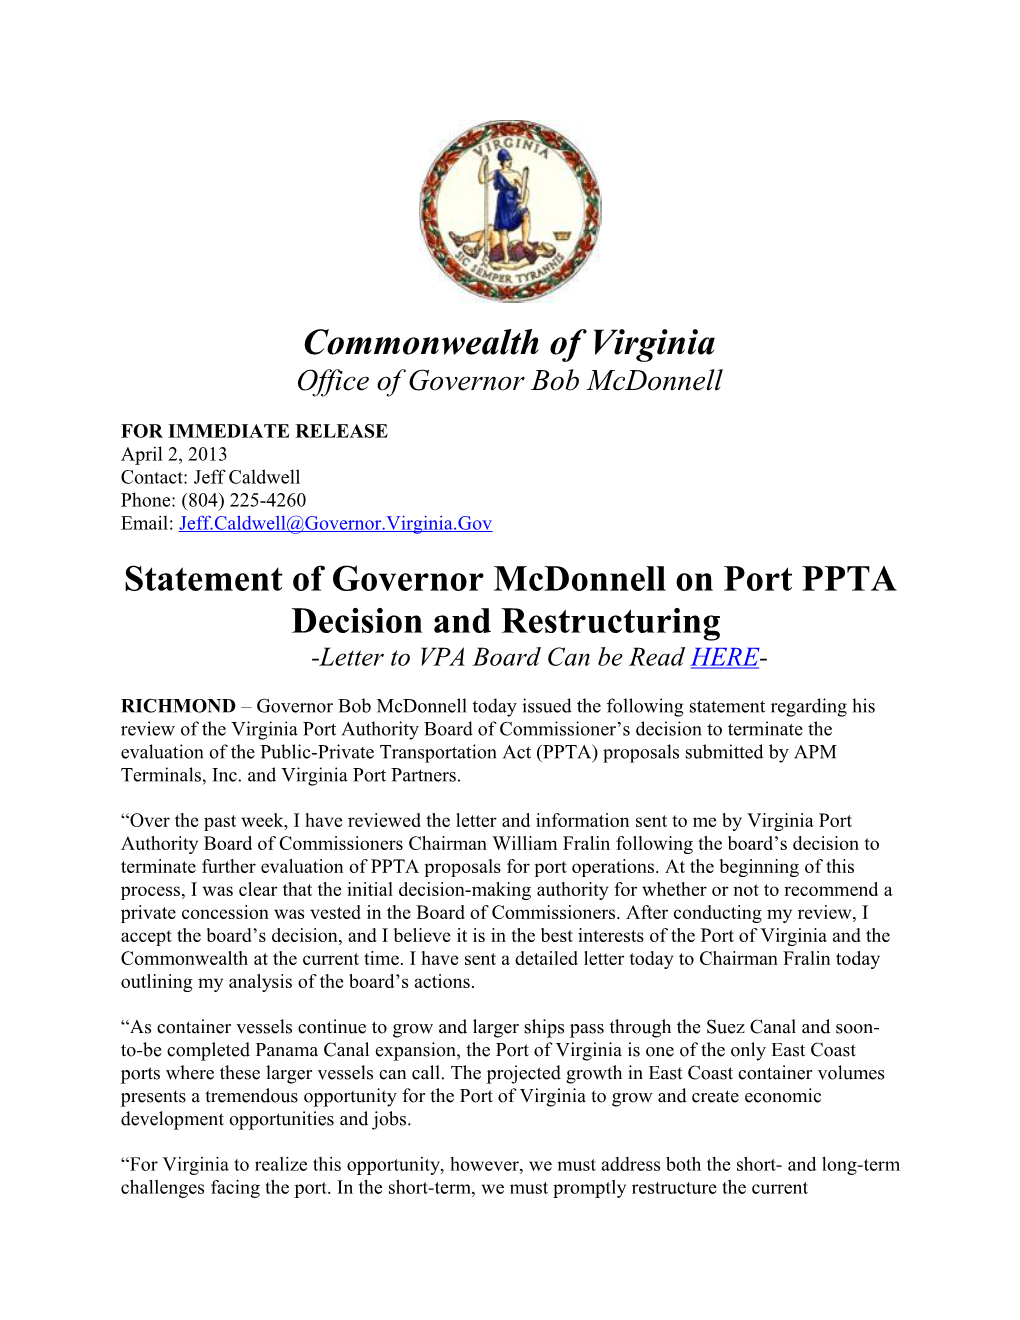 Commonwealth of Virginia Office of Governor Bob Mcdonnell